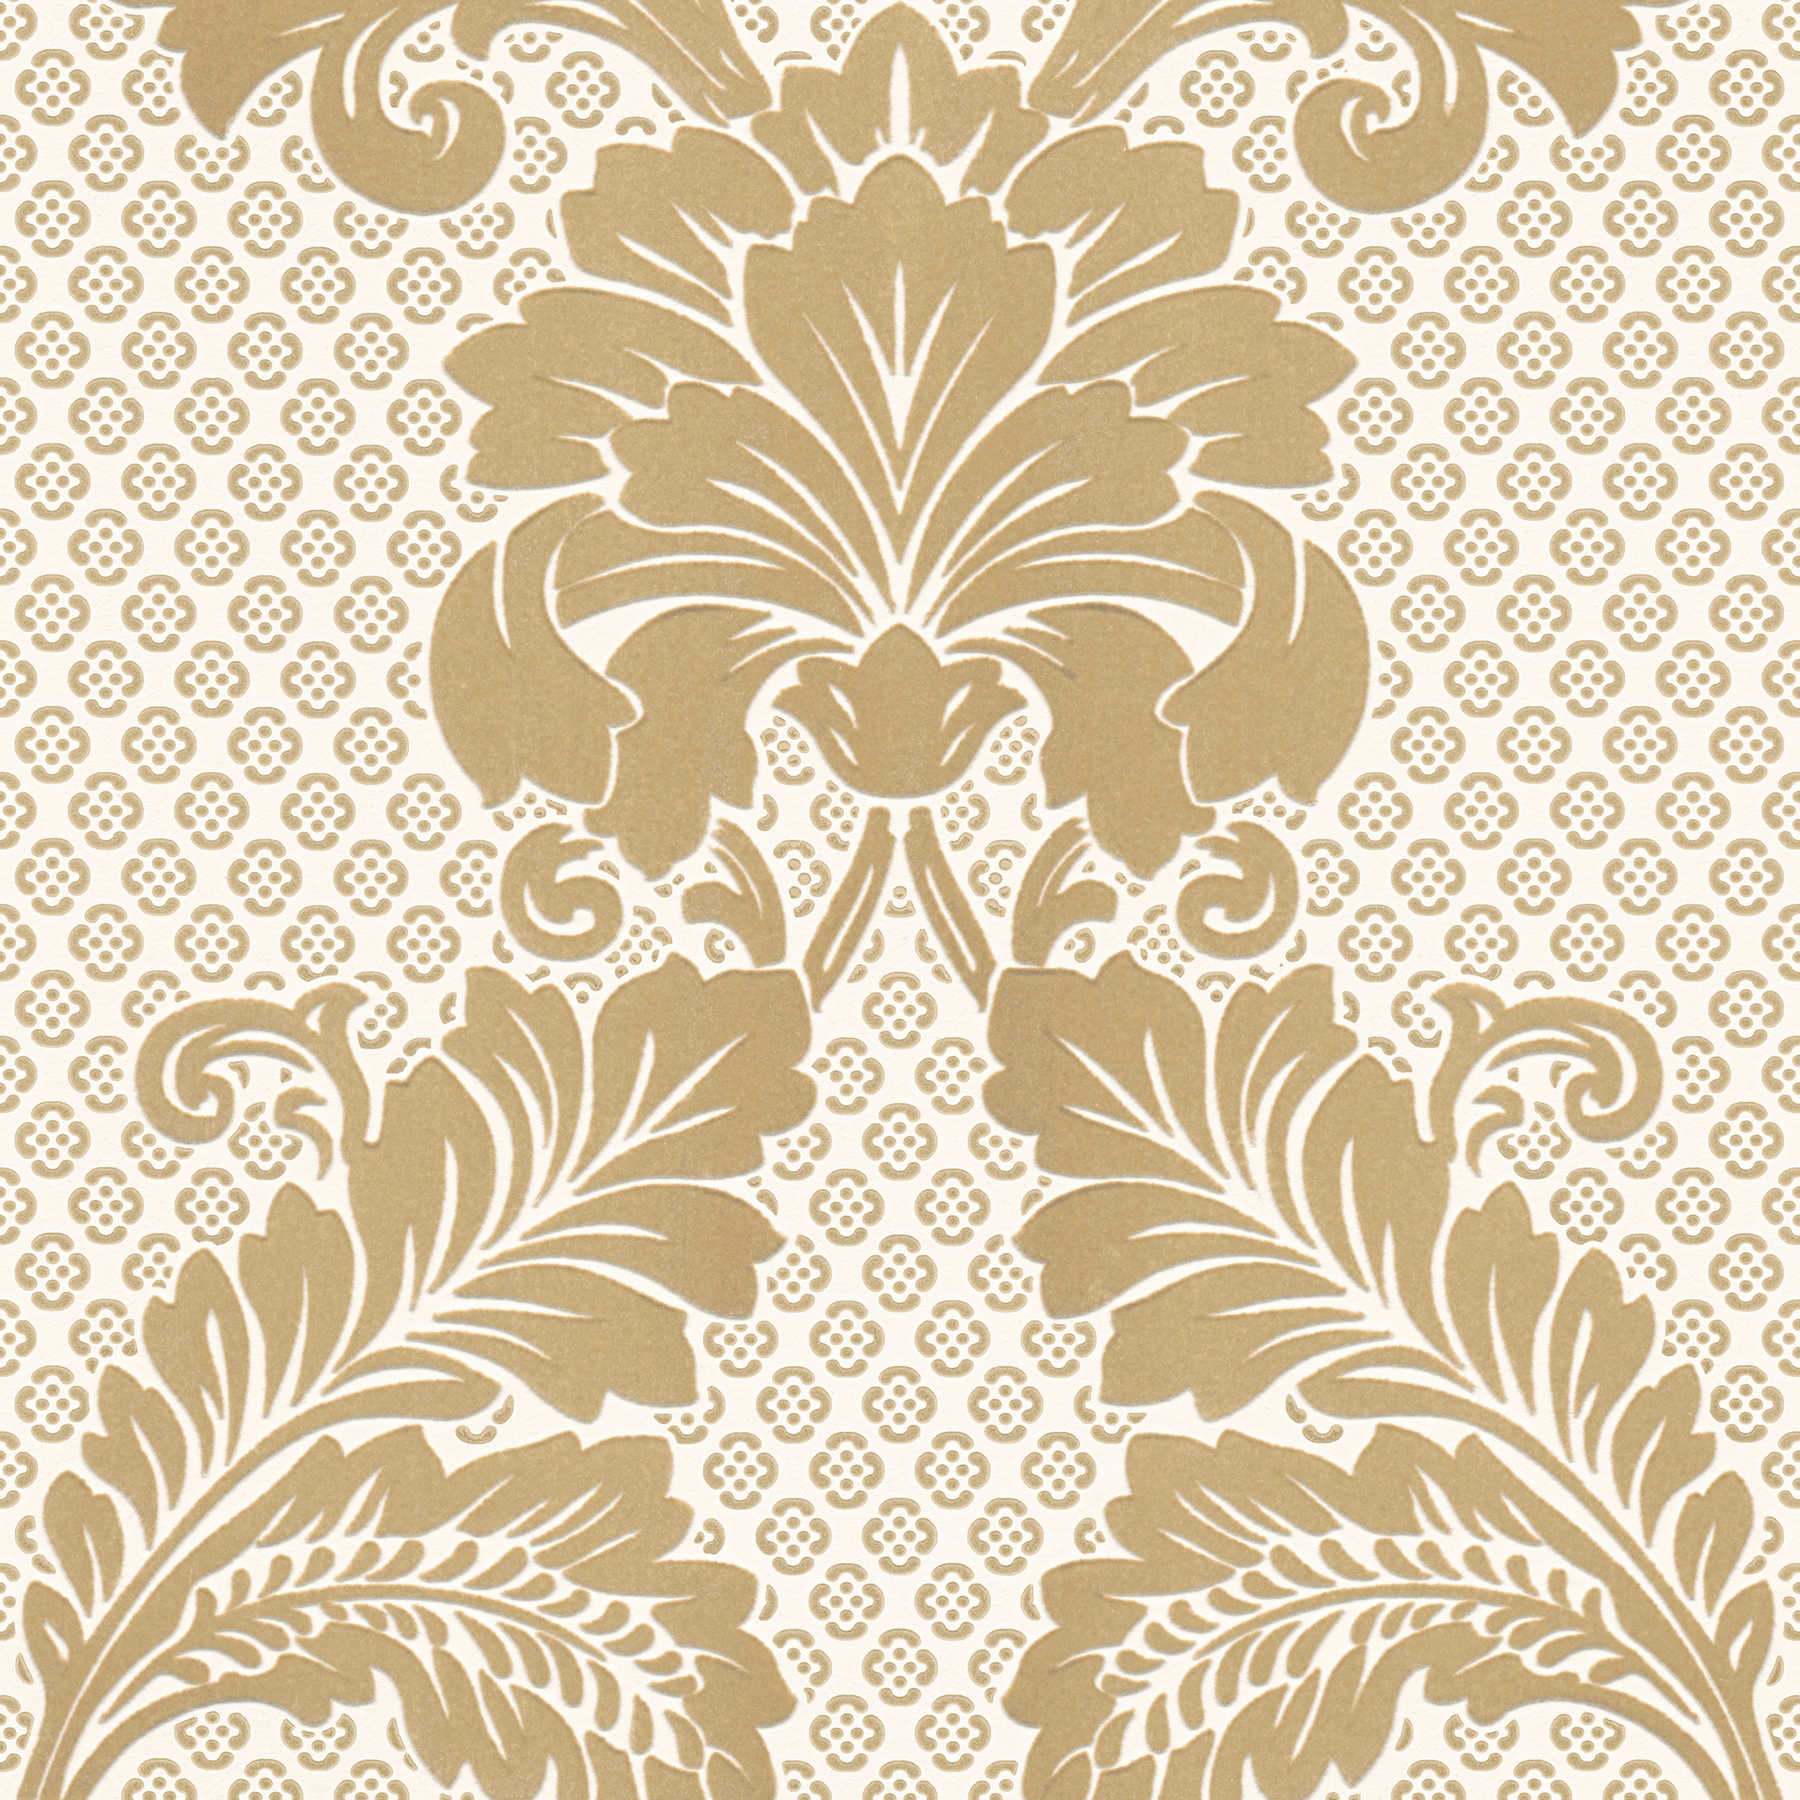 Patterned ornamental wallpaper with large floral motif - gold, cream
